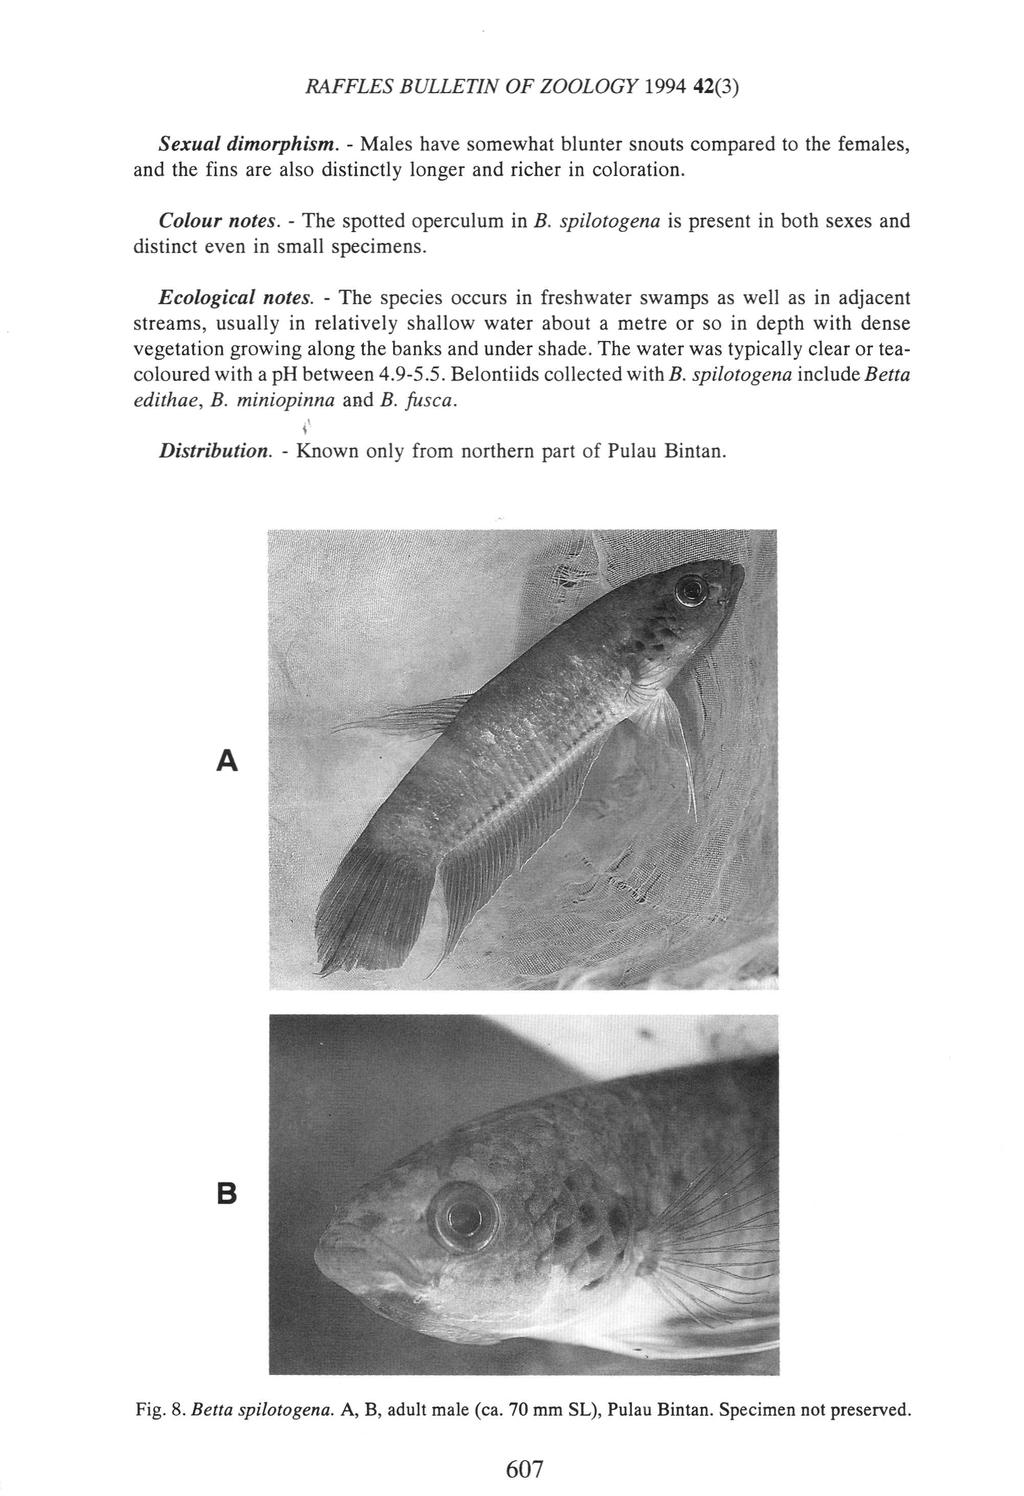 Sexual dimorphism. - Males have somewhat blunter snouts compared to the females, and the fins are also distinctly longer and richer in coloration. Colour notes.